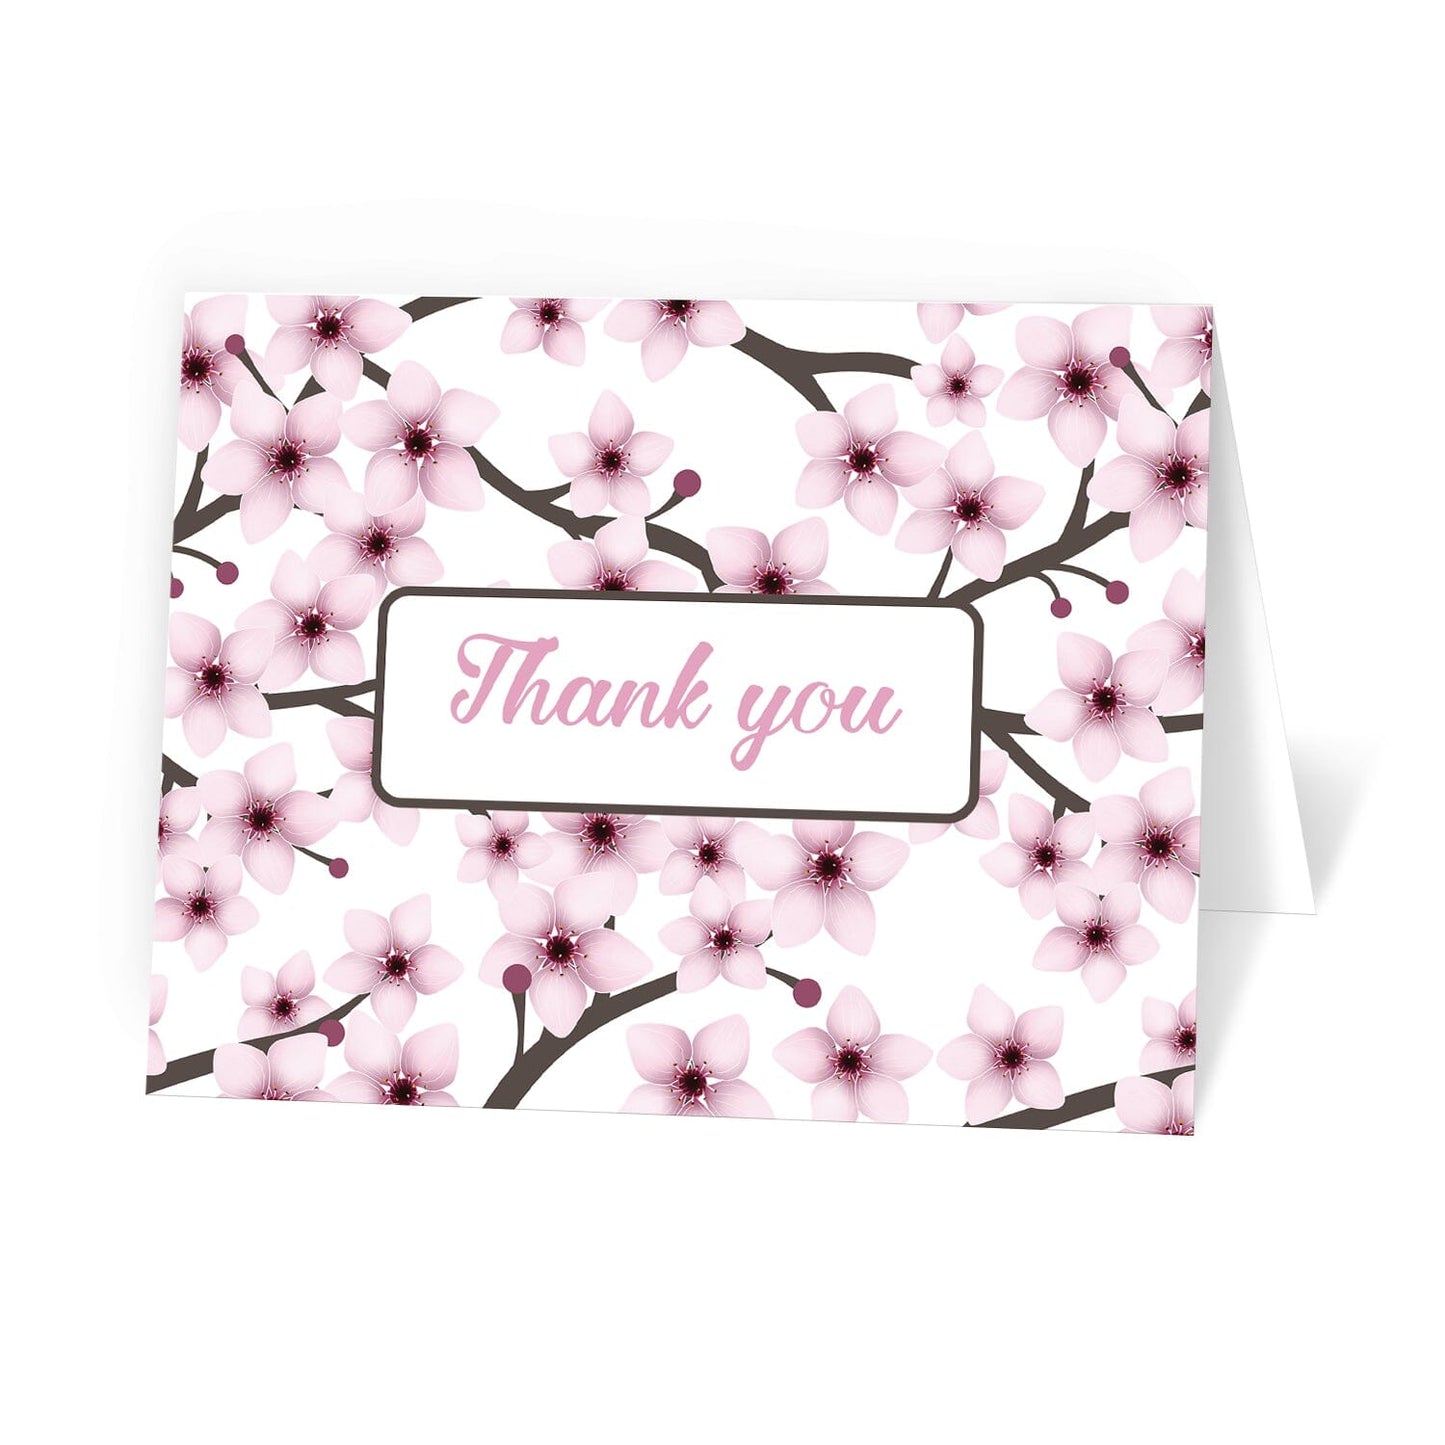 Cherry Blossom Thank You Cards at Artistically Invited.